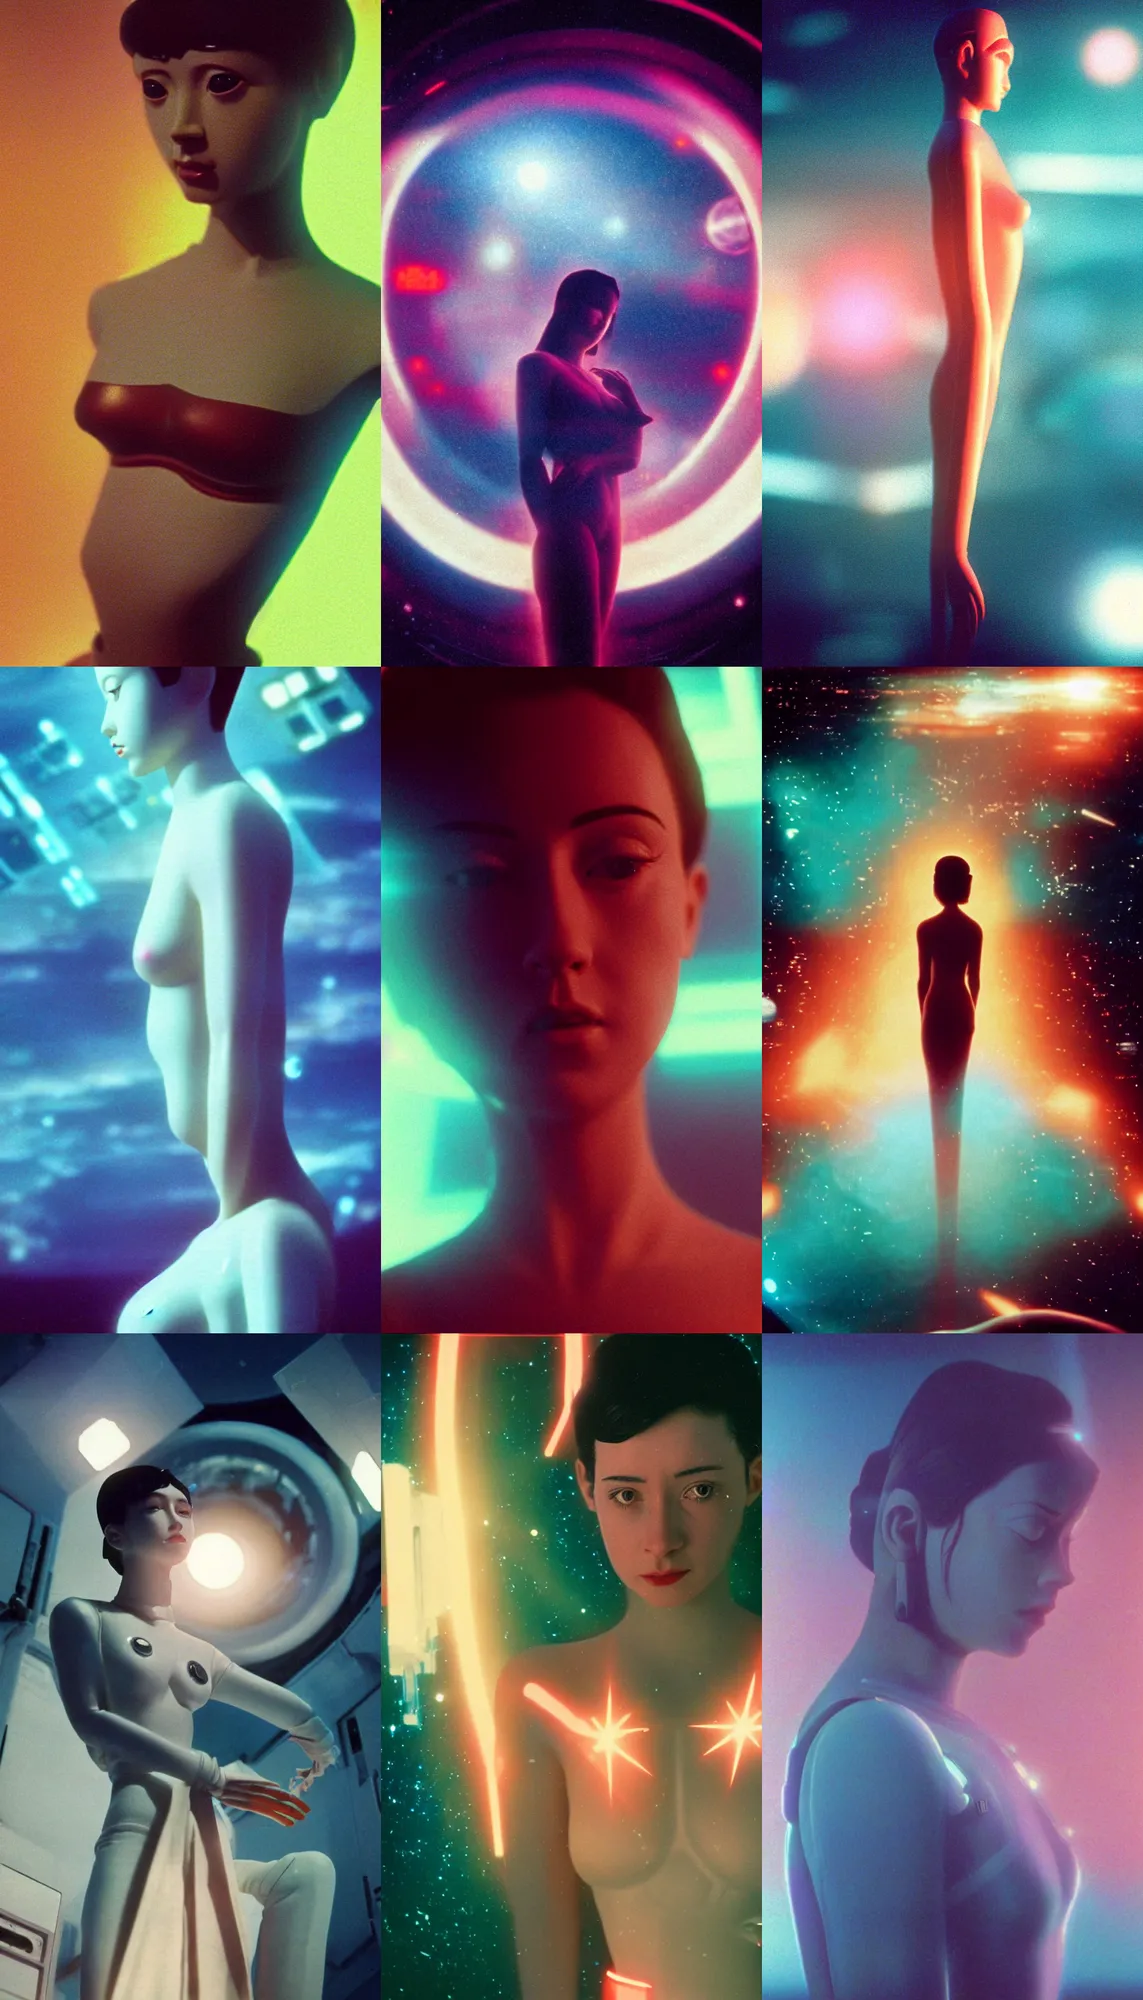 Prompt: Cinestill 50d, 8K, 35mm,J.J Abrams flare; beautiful ultra realistic vaporwave minimalistic pointé posed avalokiteshvara pilot in space(1950) film still medical lab scene, 2000s frontiers in blade runner retrofuturism fashion magazine September hyperrealism holly herndon edition, highly detailed, extreme closeup three-quarter pointé posed model portrait, tilt shift background, three point perspective: focus on anti-g flight suit;pointé pose;open mouth,terrified, eye contact, soft lighting